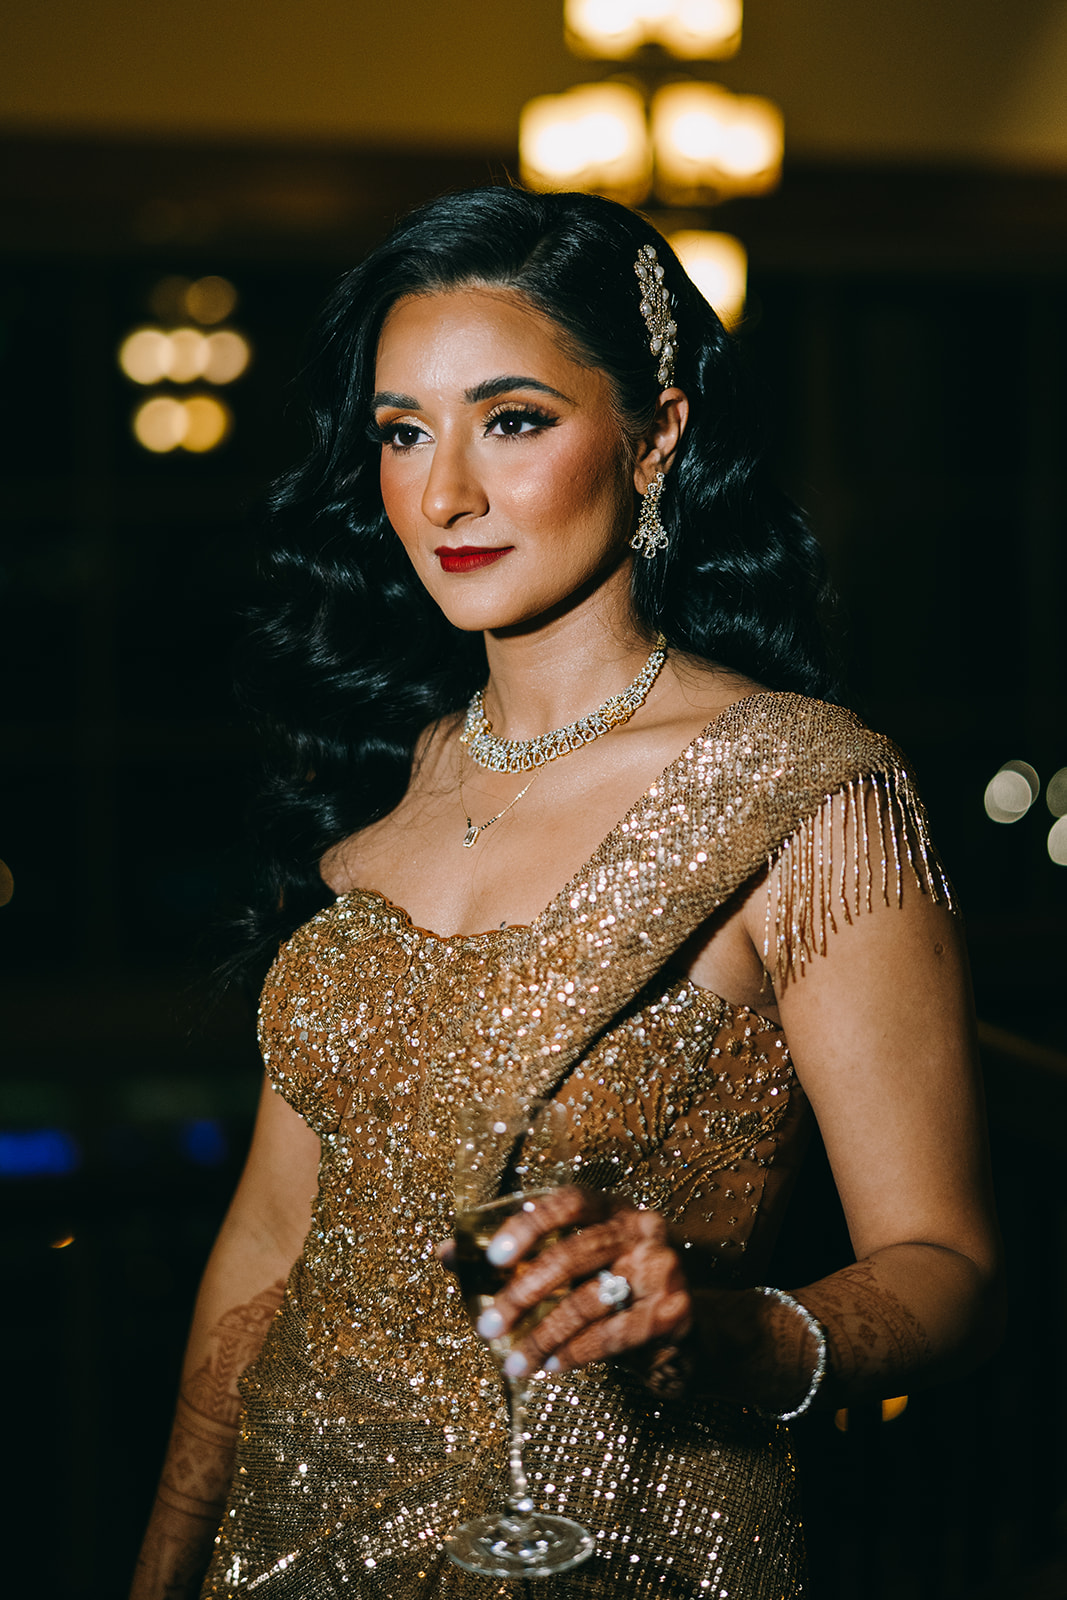 Woman in golden sequined dress with her hair down looking away from camera